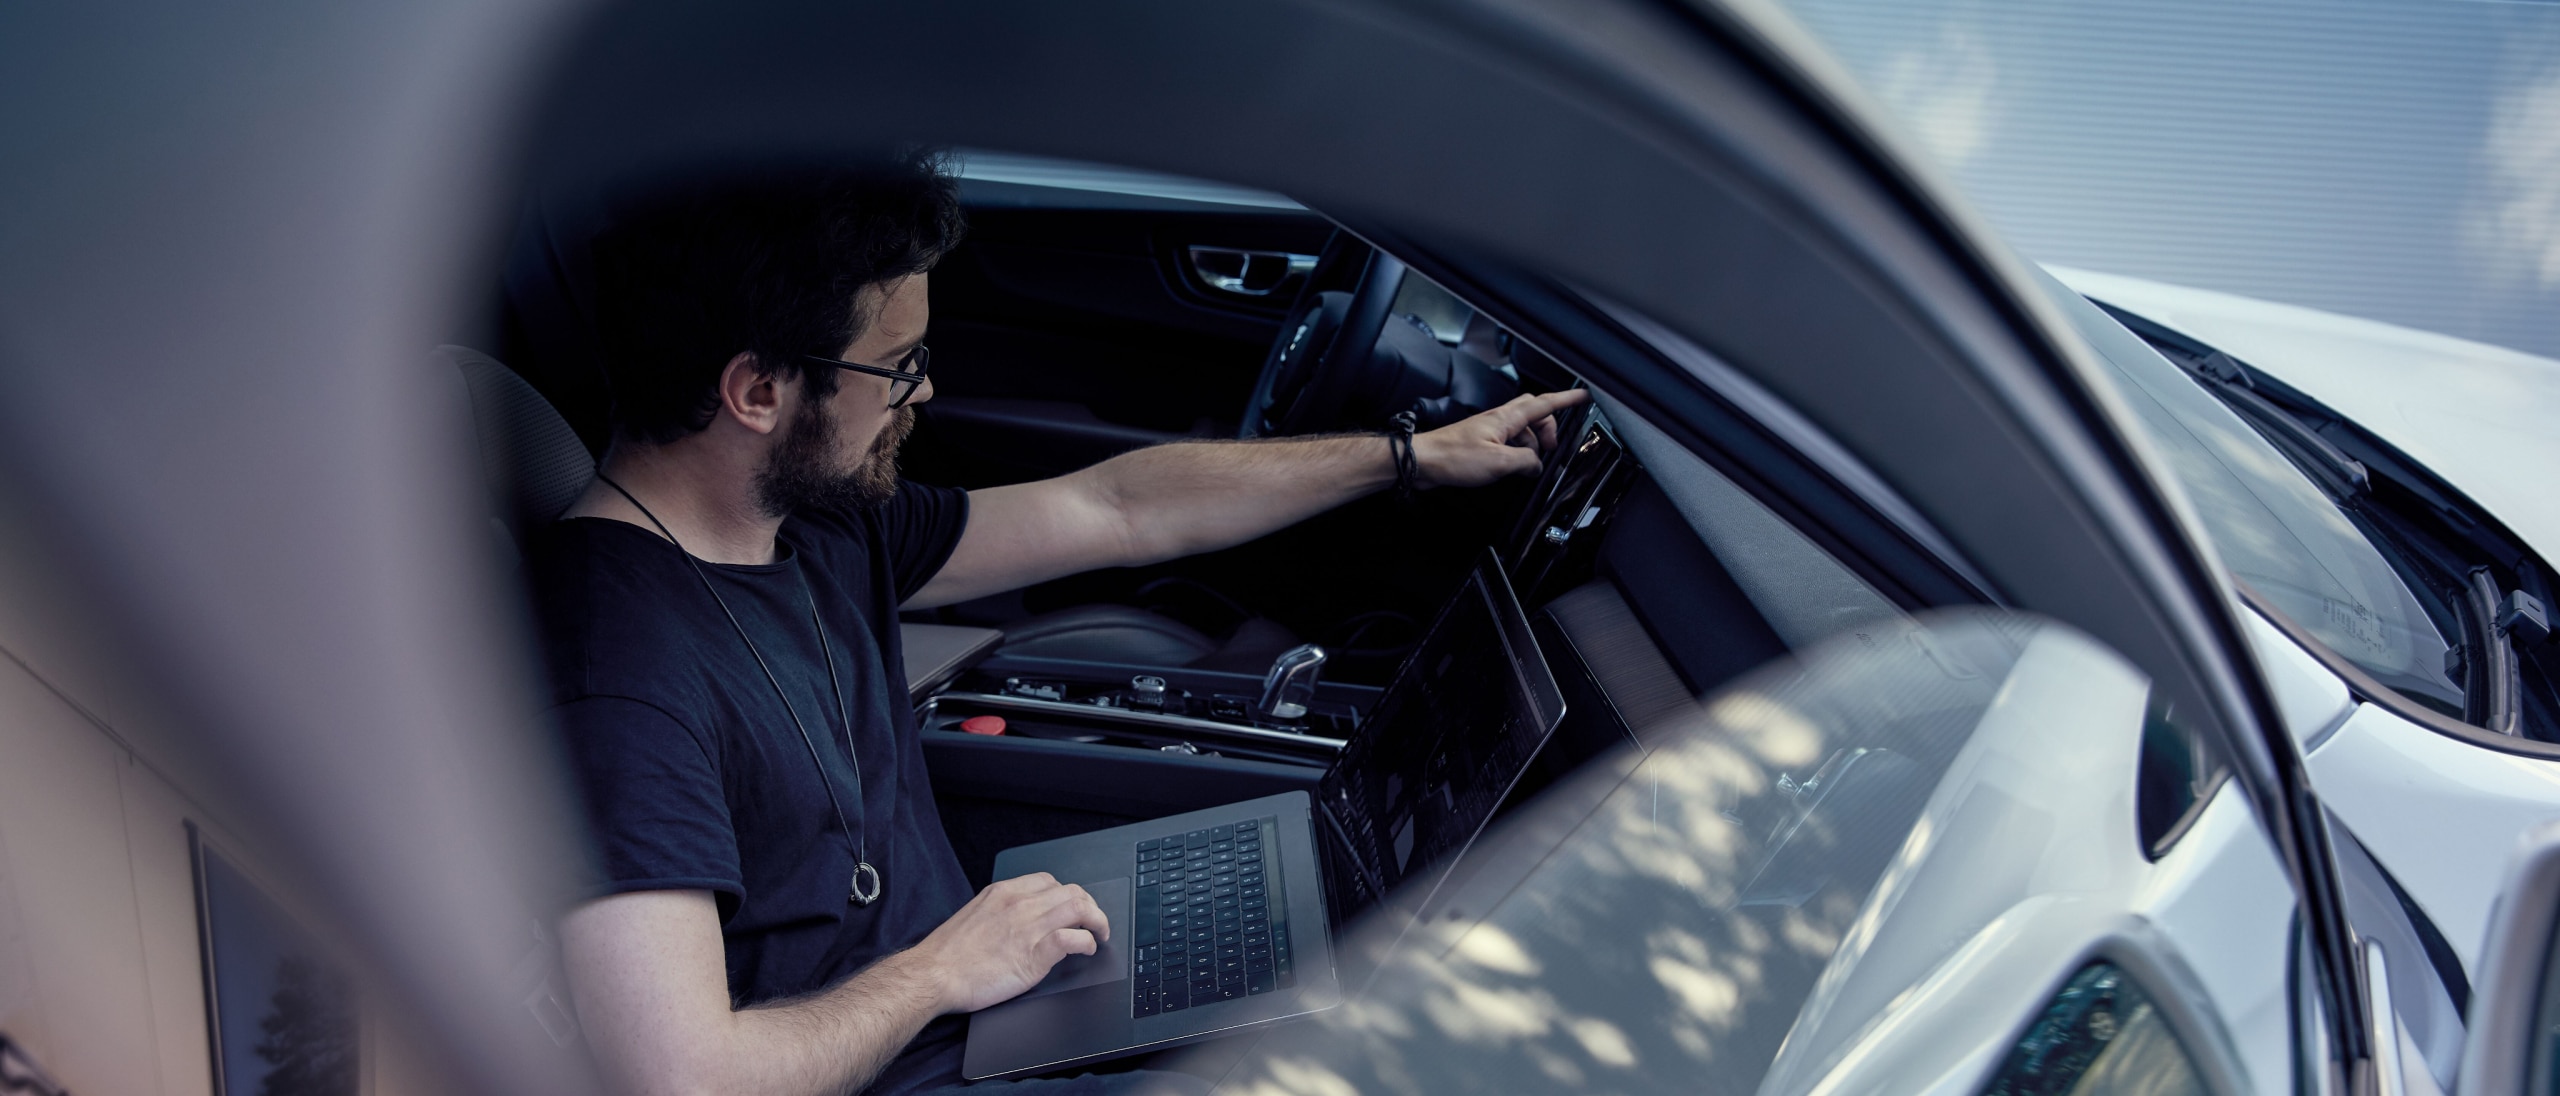 A man sat inside a car working on a laptop with a finger on the in-car system.